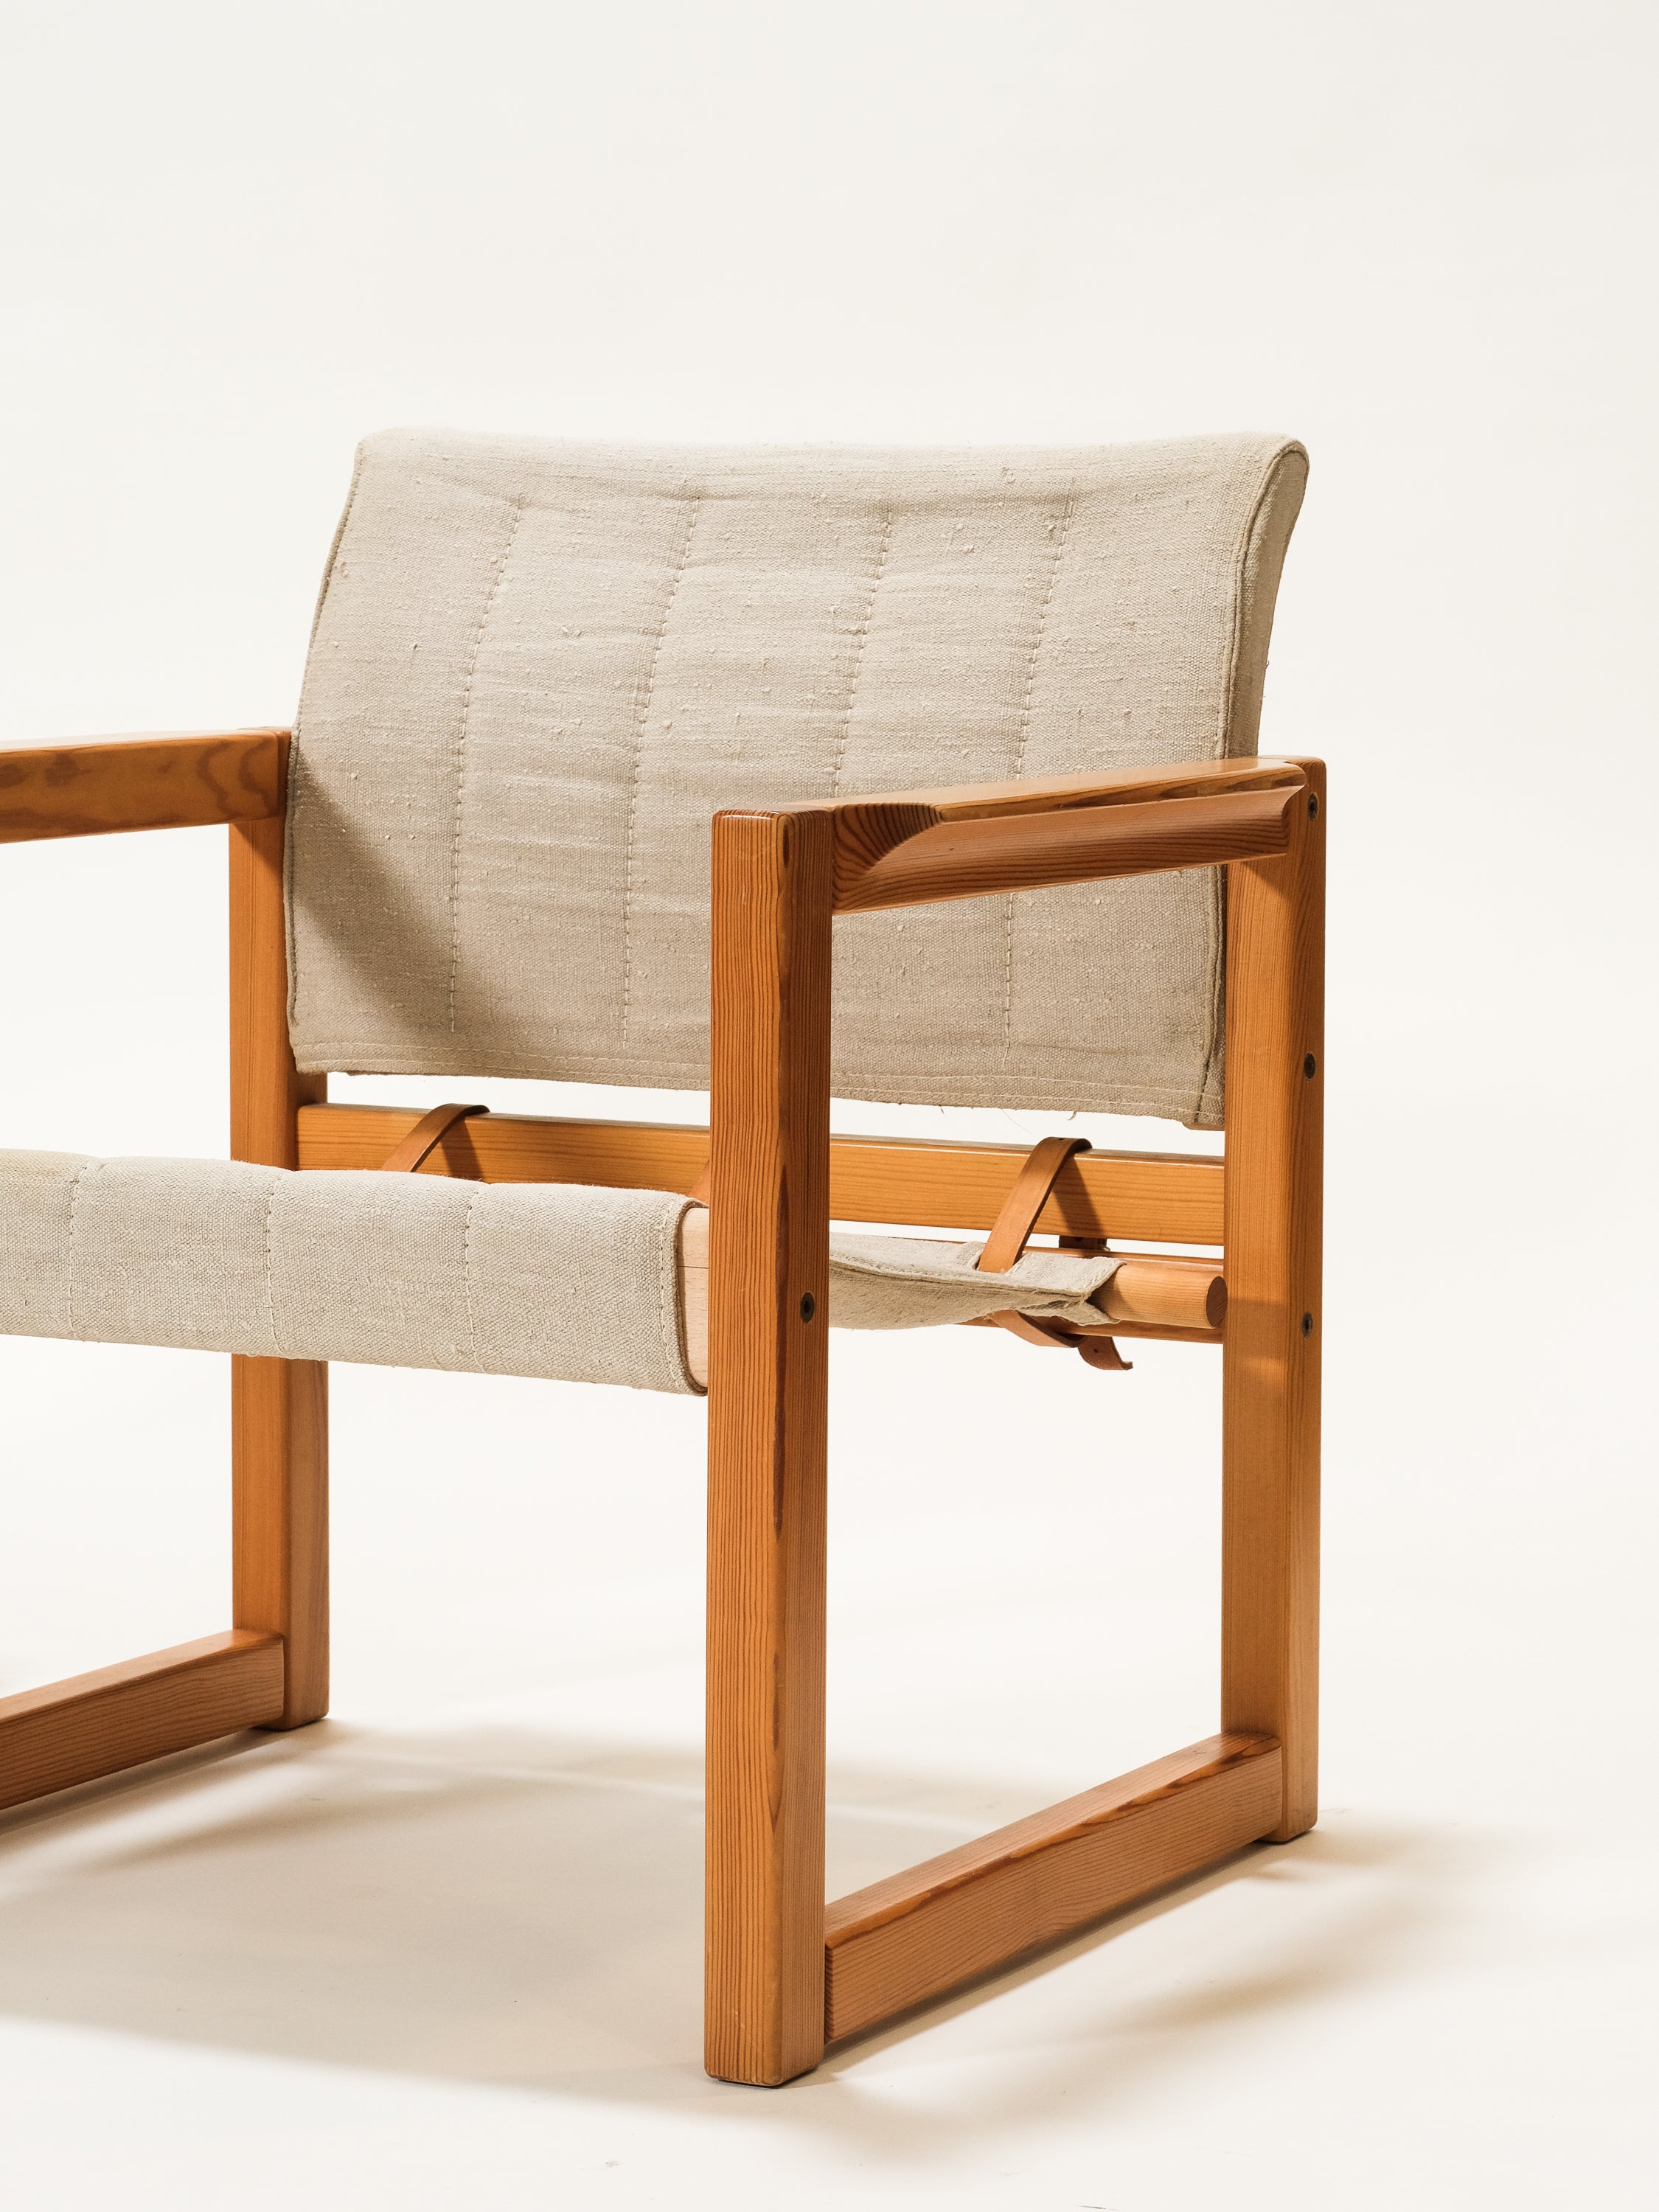 Pair of Solid Pine "Diana" Easy Chairs by Karin Mobring for Ikea, 1970s